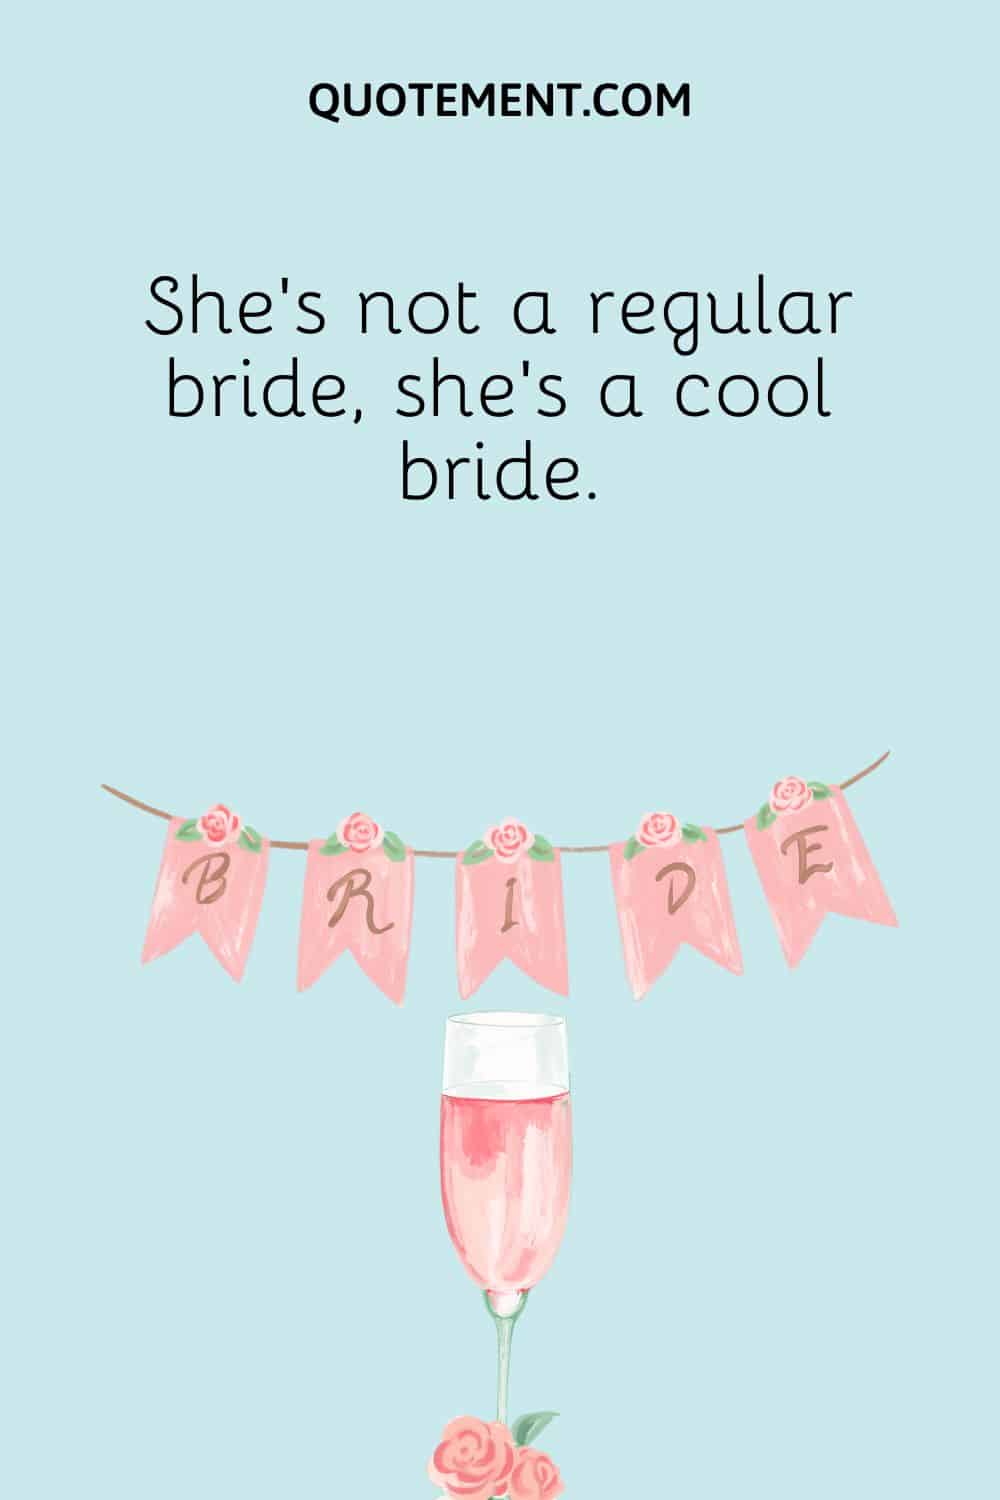 She's not a regular bride, she's a cool bride.